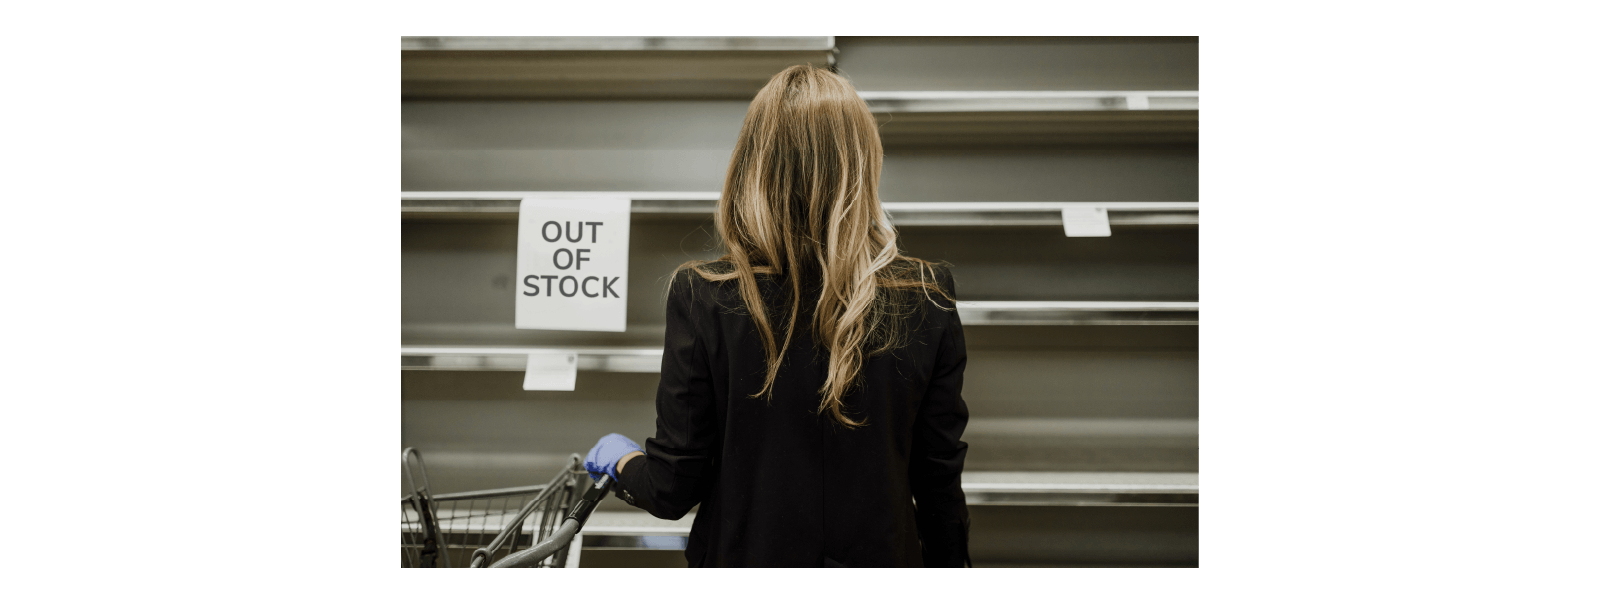 Lady looking at 'Out of Stock' shelves